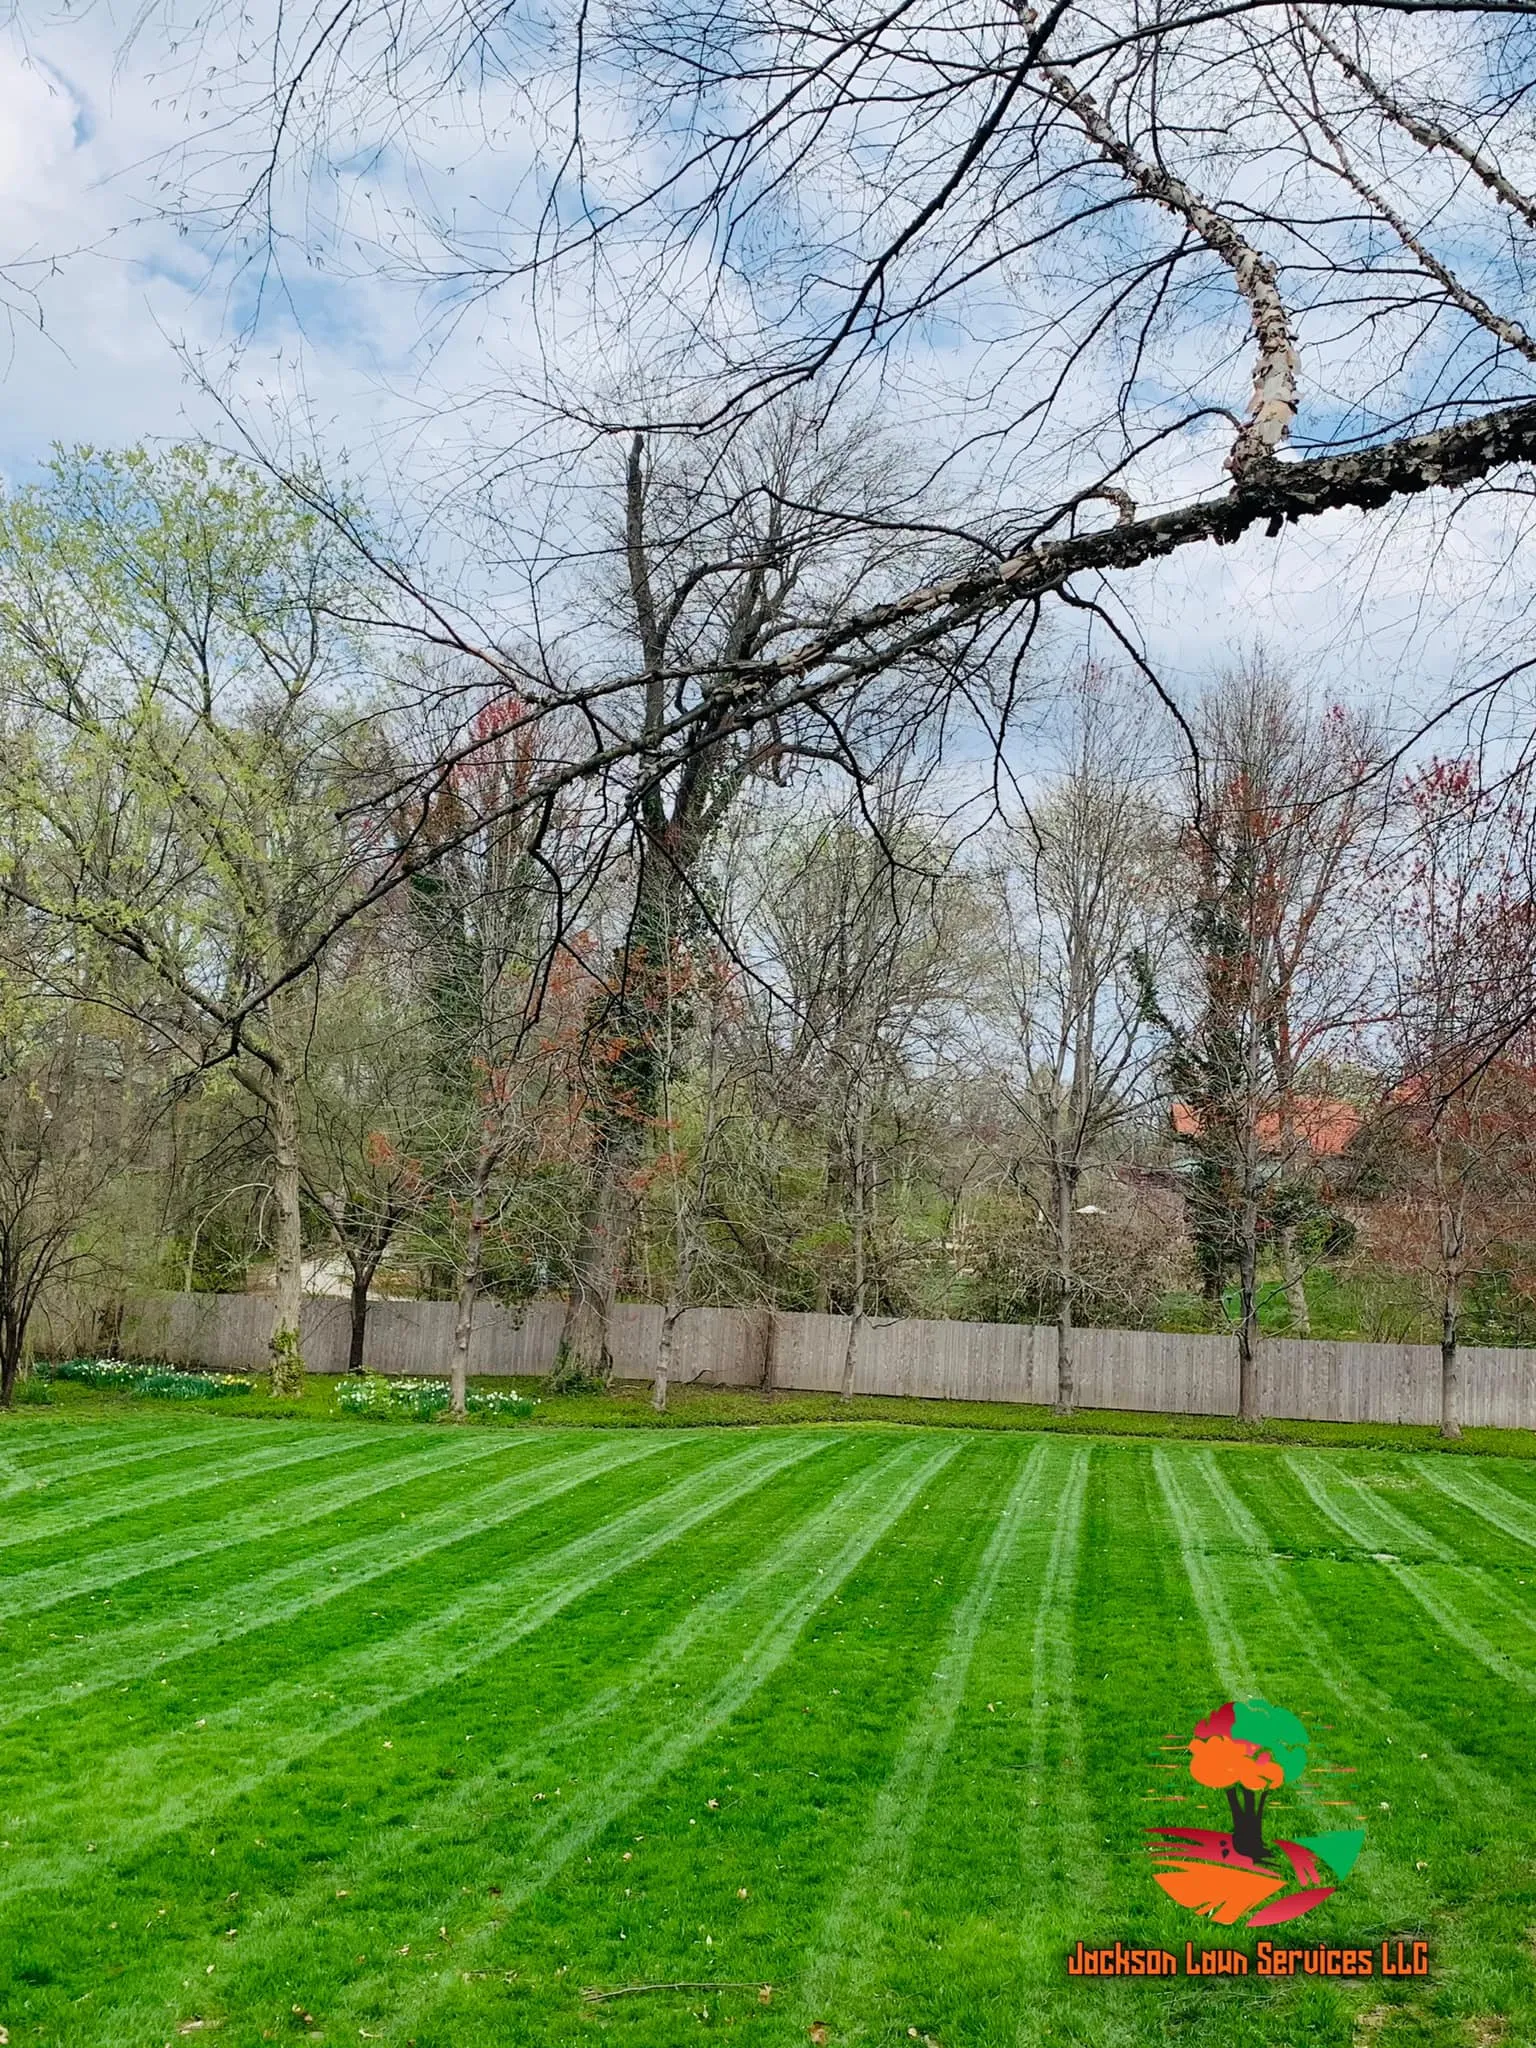 Mowing for Jackson Lawn Services LLC in Florissant , MO